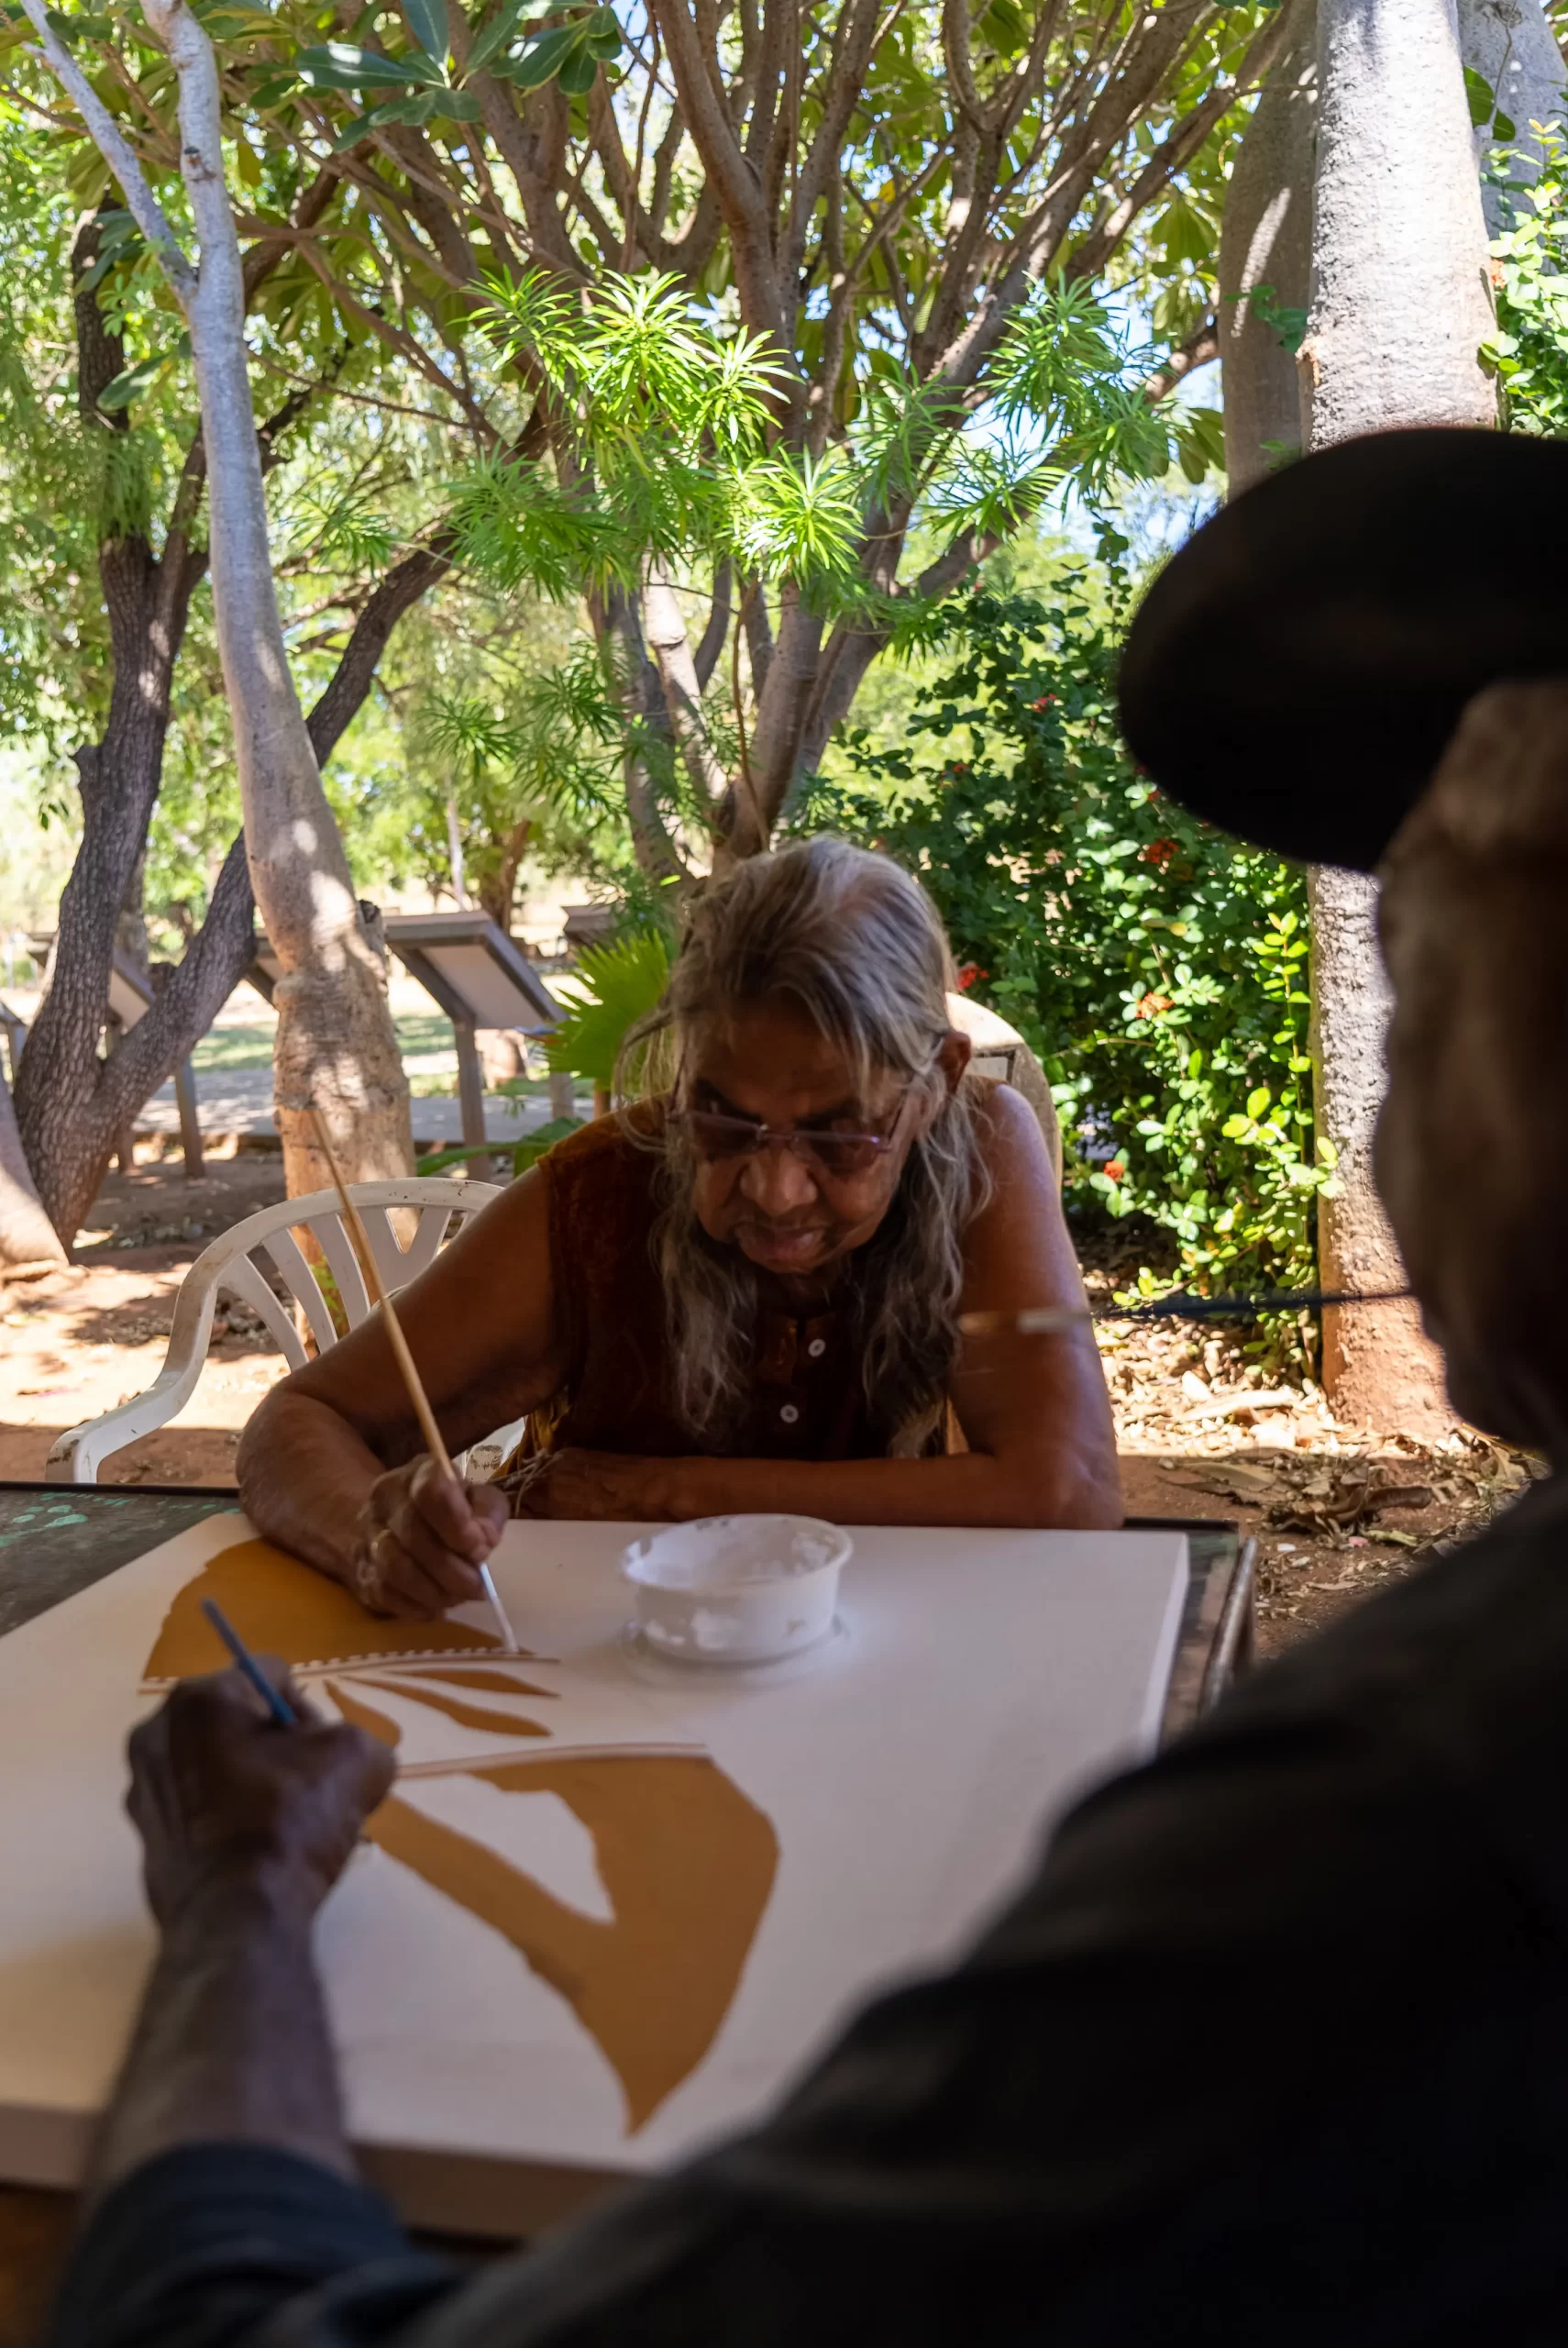 Two people painting on a canvas in a tropical area